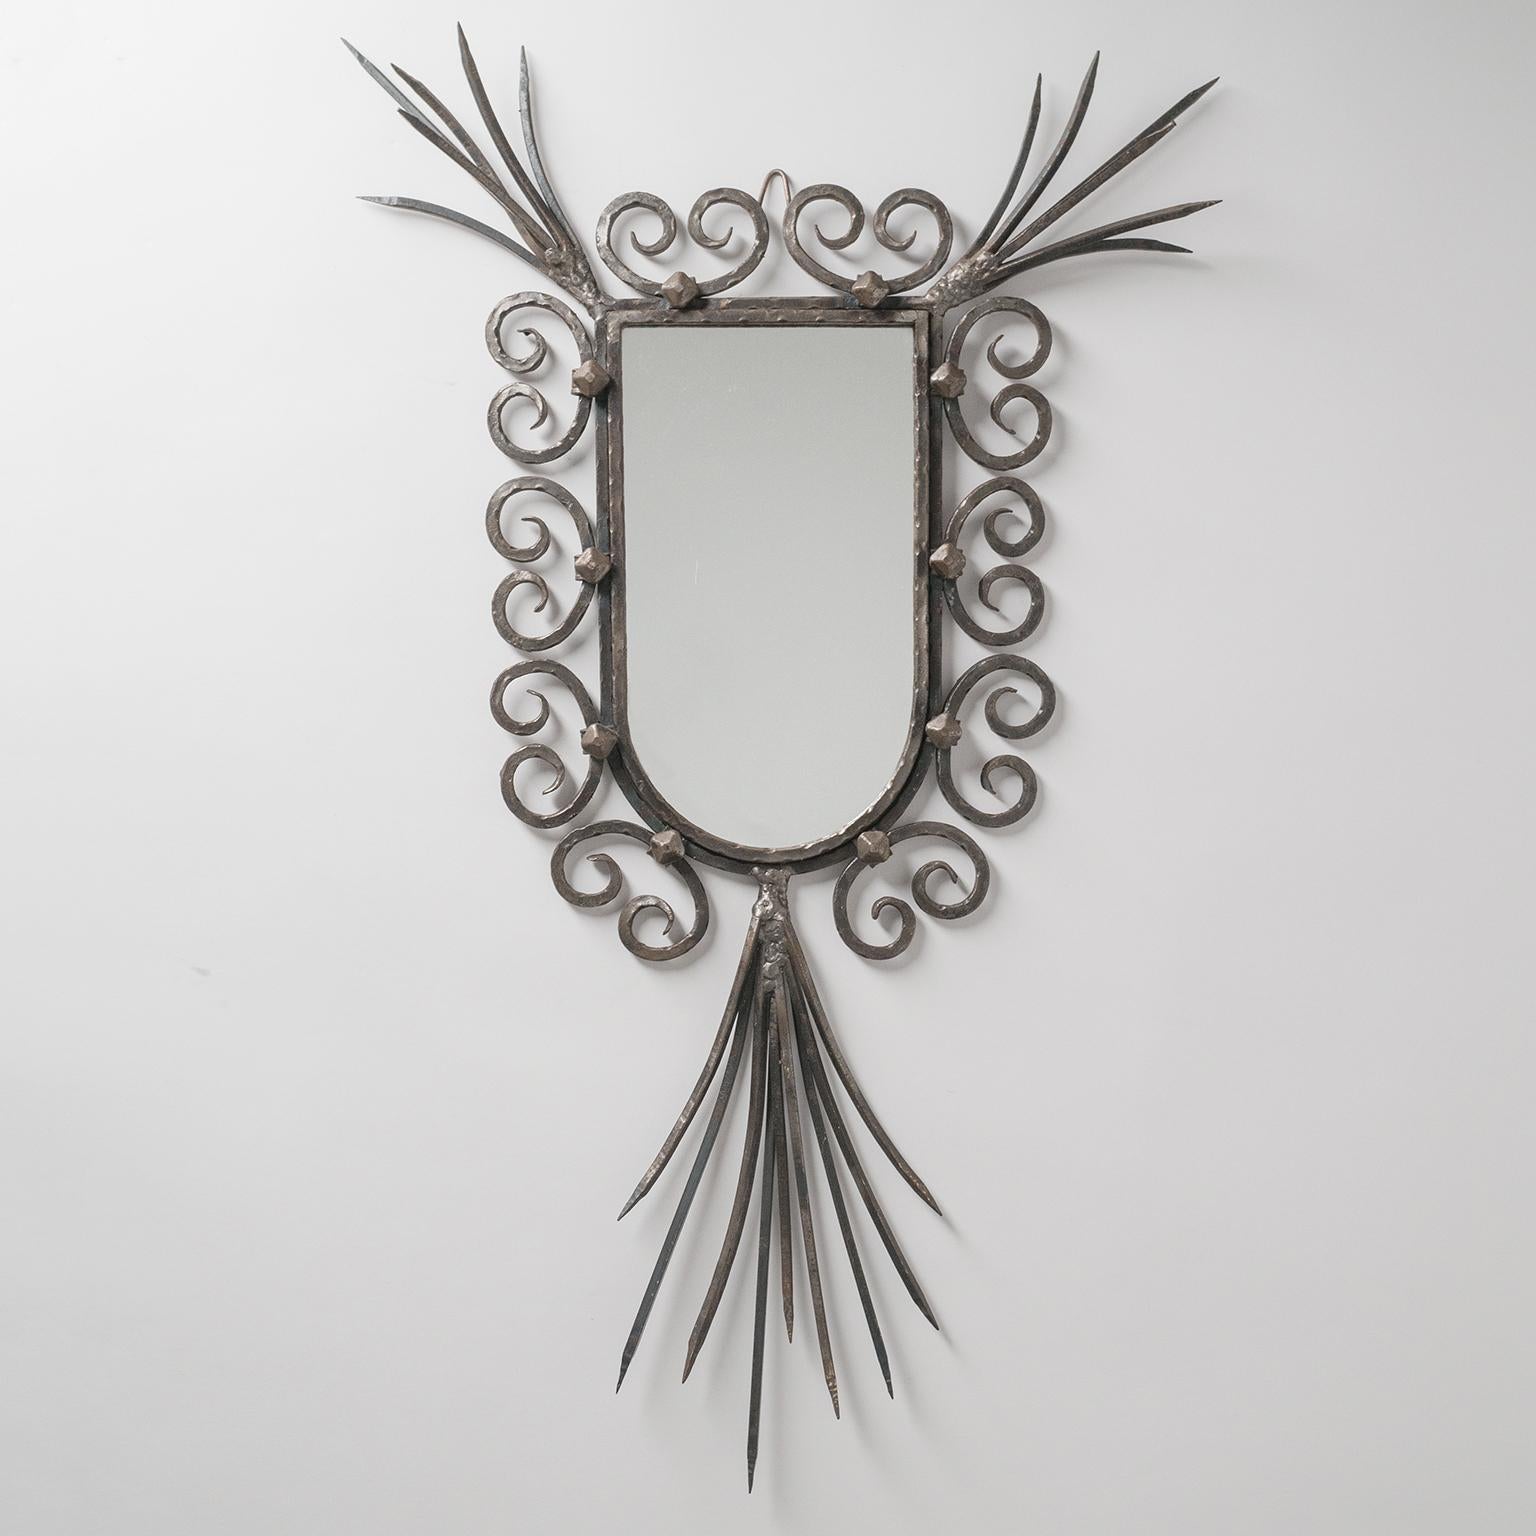 Rare French Brutalist mirror from the 1960-1970s. Very unusual sculptural design combining classical elements with expressive 'rawness'. Mirror area is 31 x 17cm or 12 x 7inches.